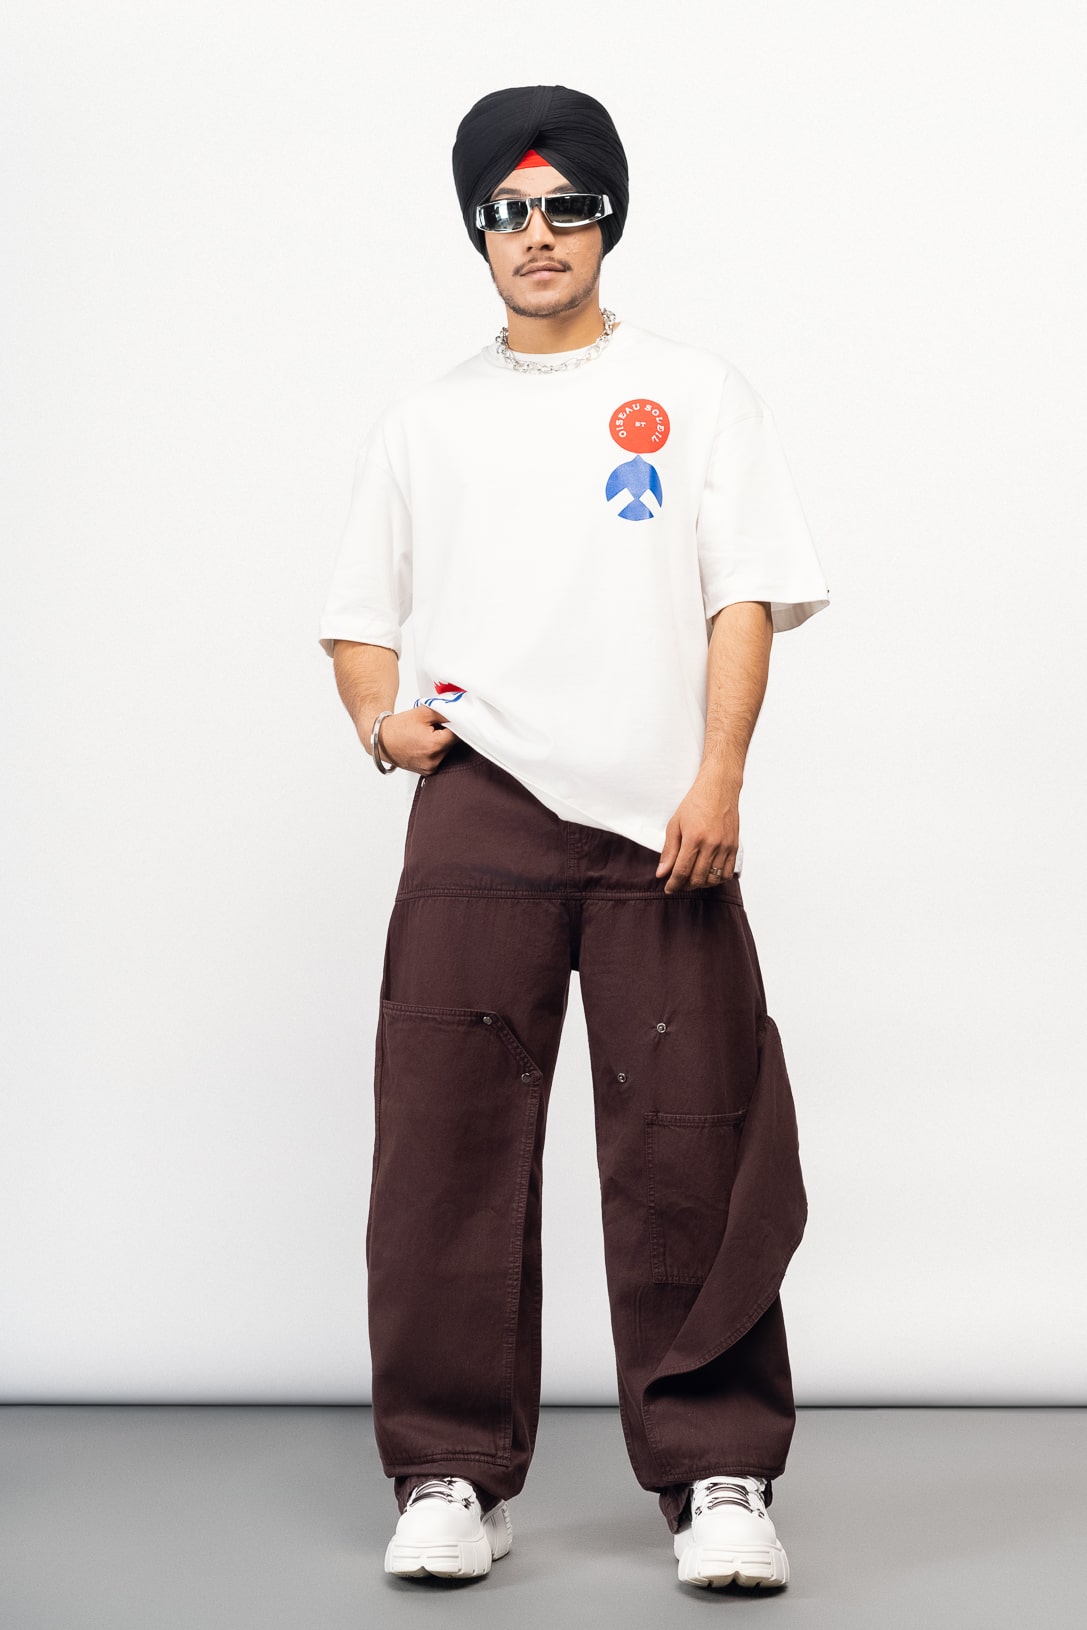 Baggy Pants for Men 7 Style Ideas to Nail the Baggy Pants Trend